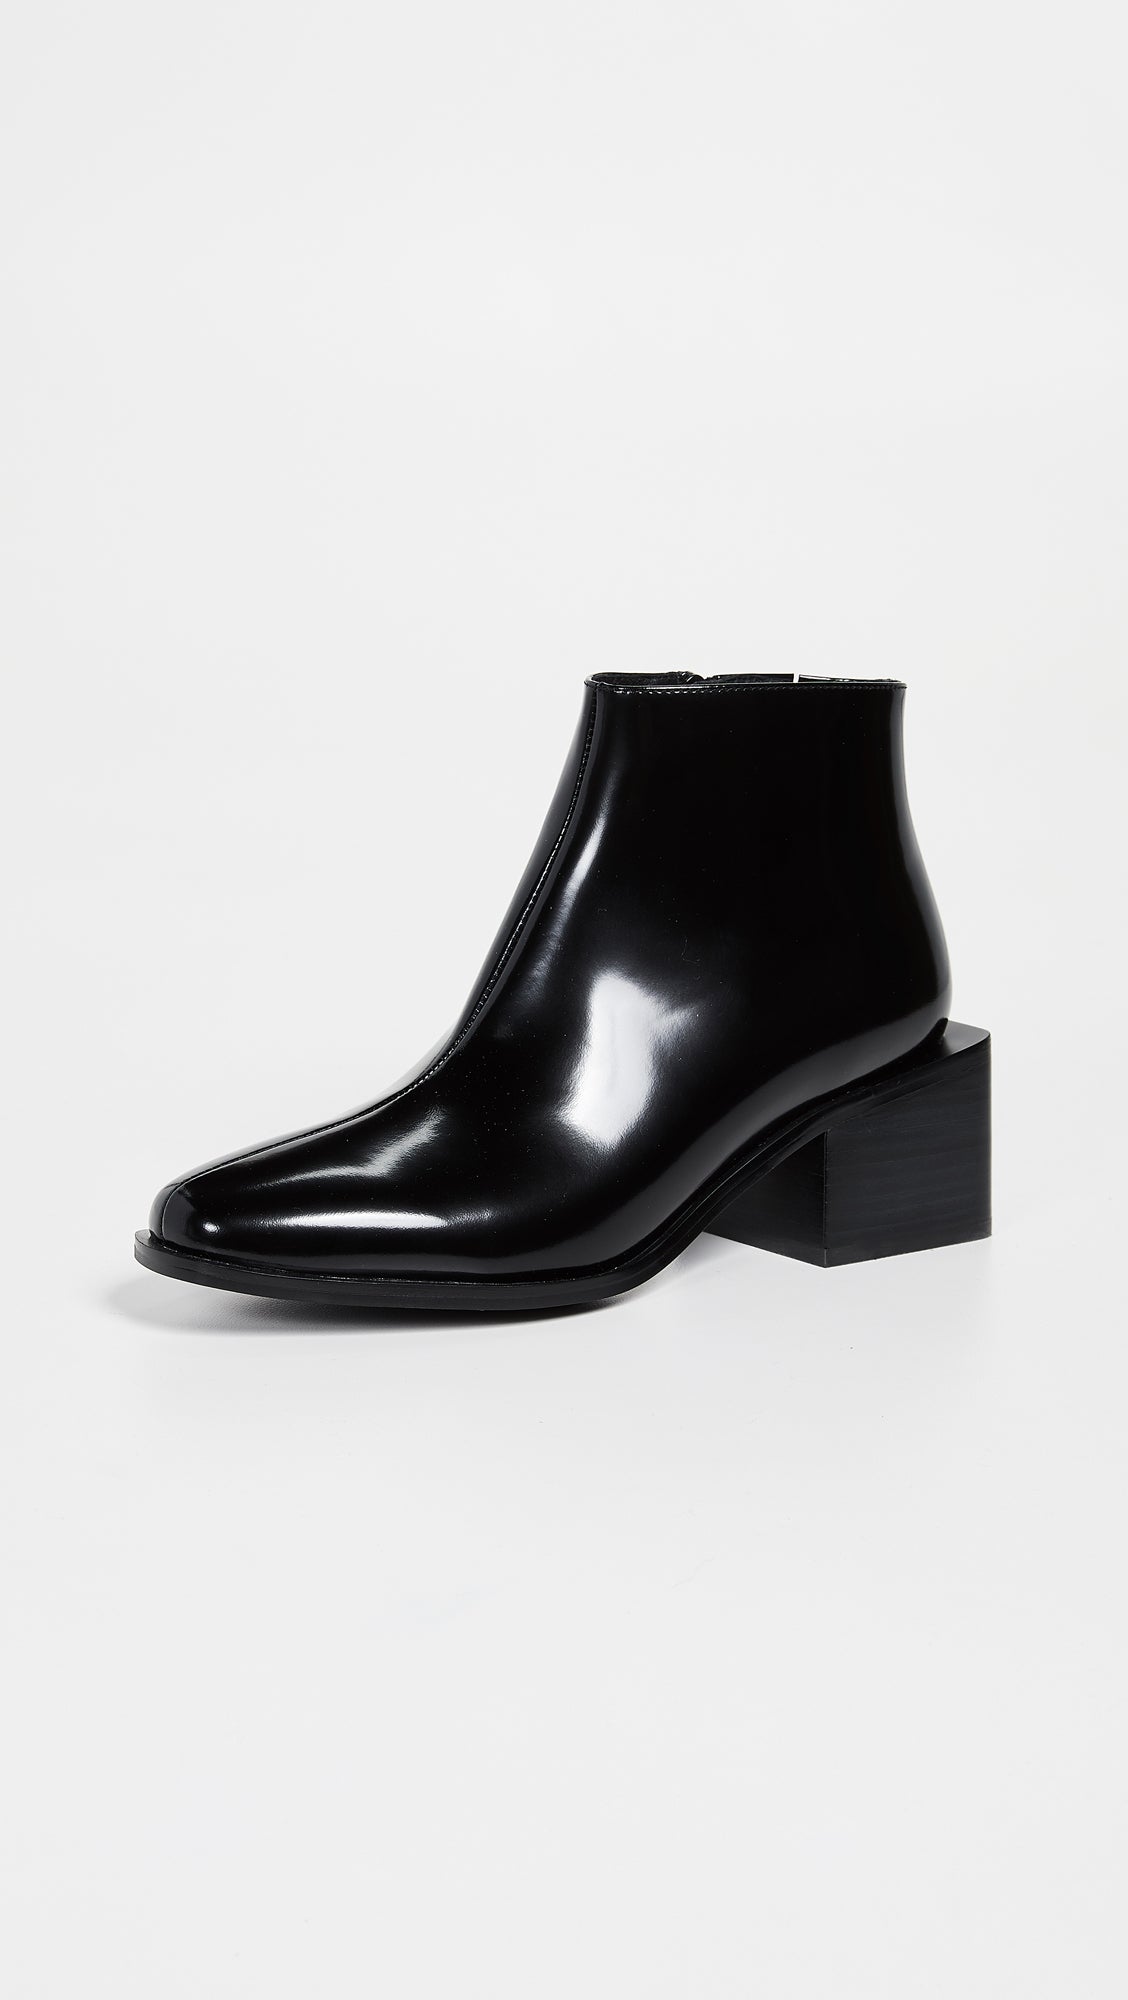 Shopbop's Designer Shoe Sale Is What We've All Been Waiting For